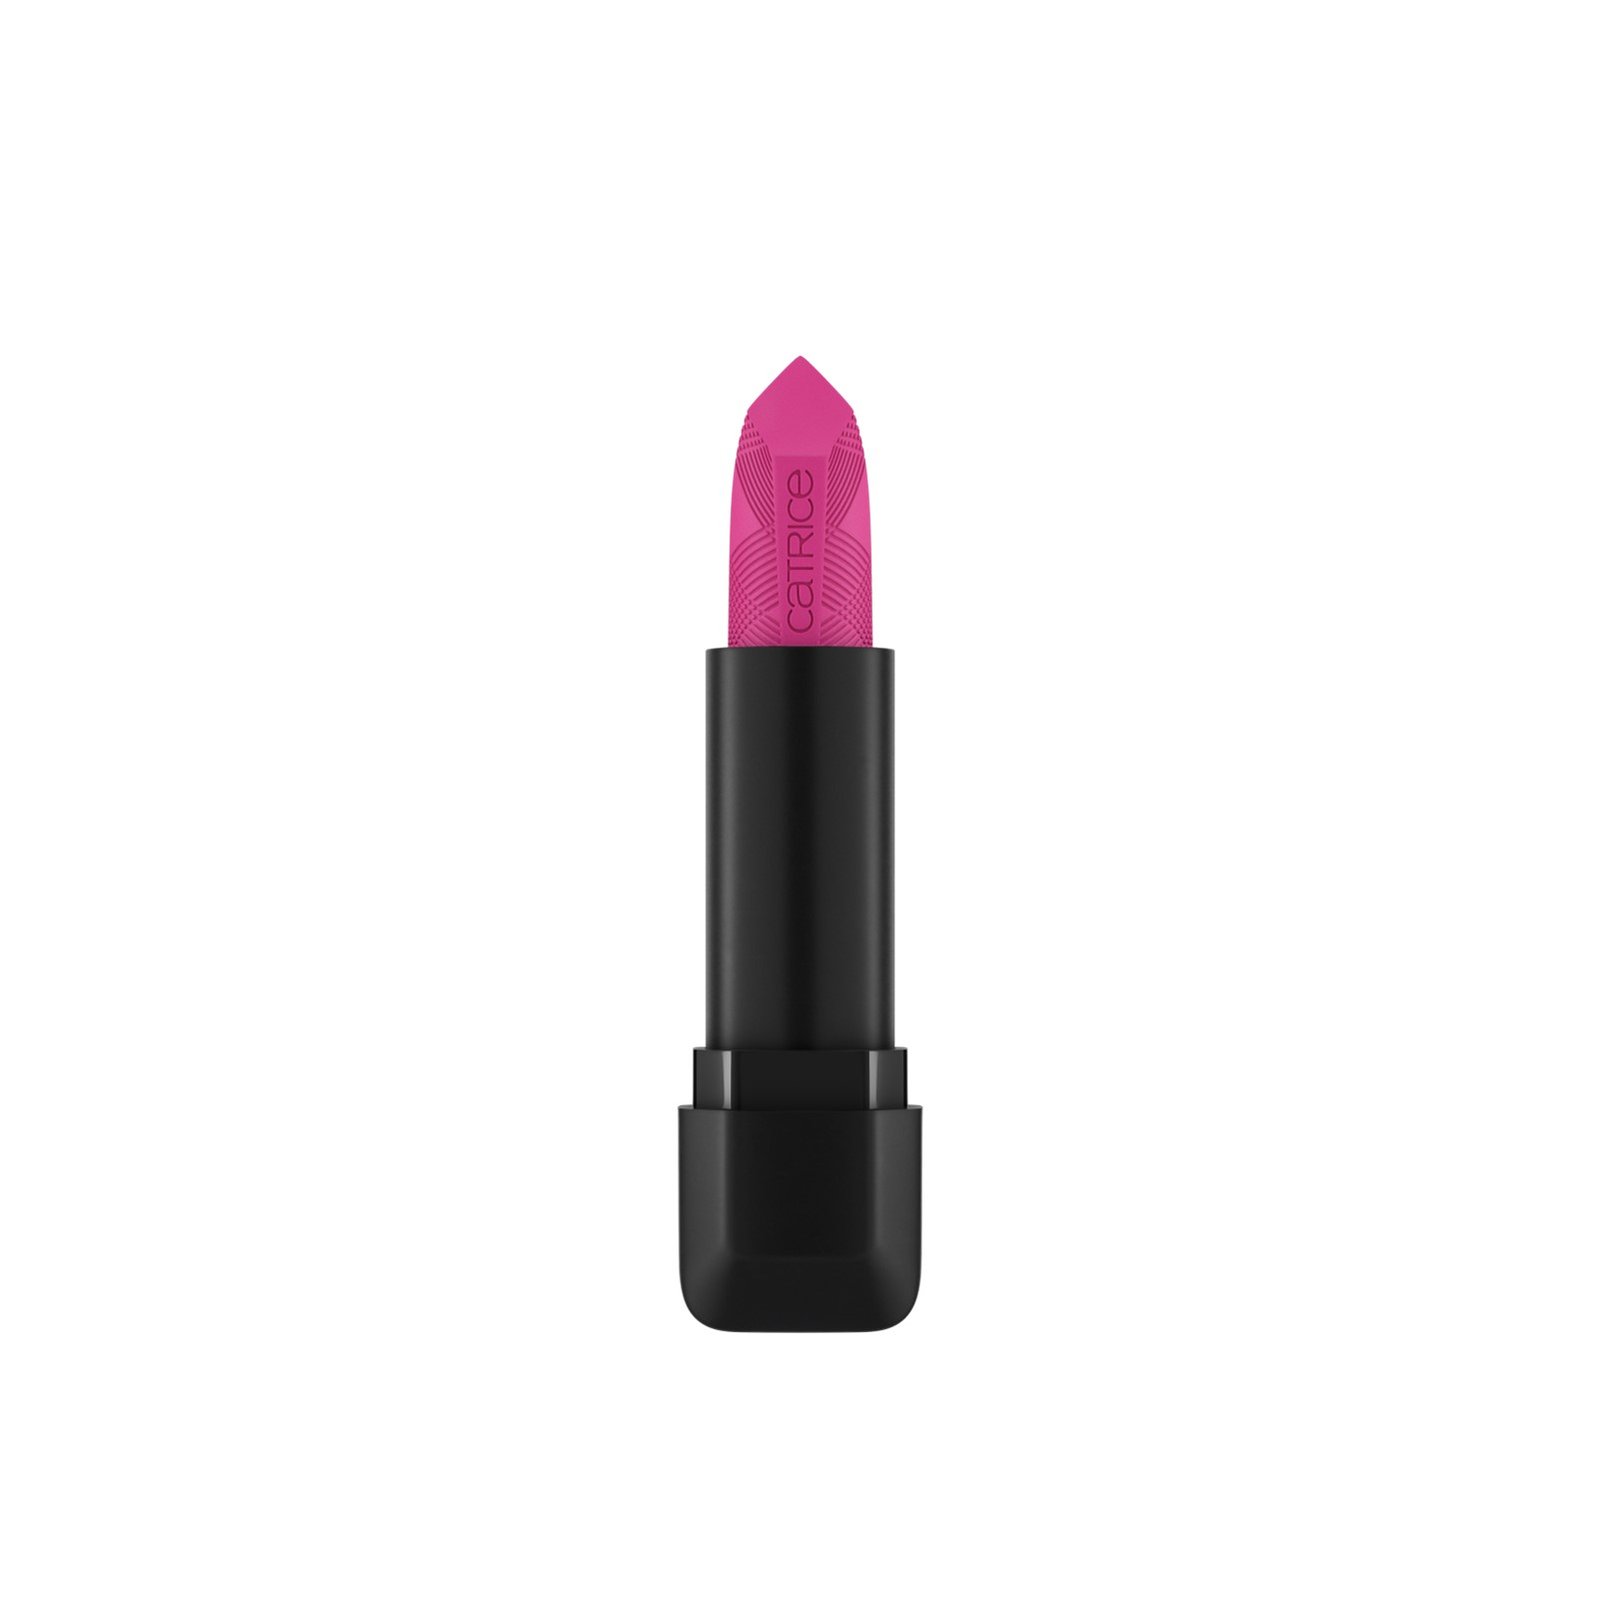 Catrice Scandalous Matte Lipstick 080 Casually Overdressed 3.5g (0.12 oz)